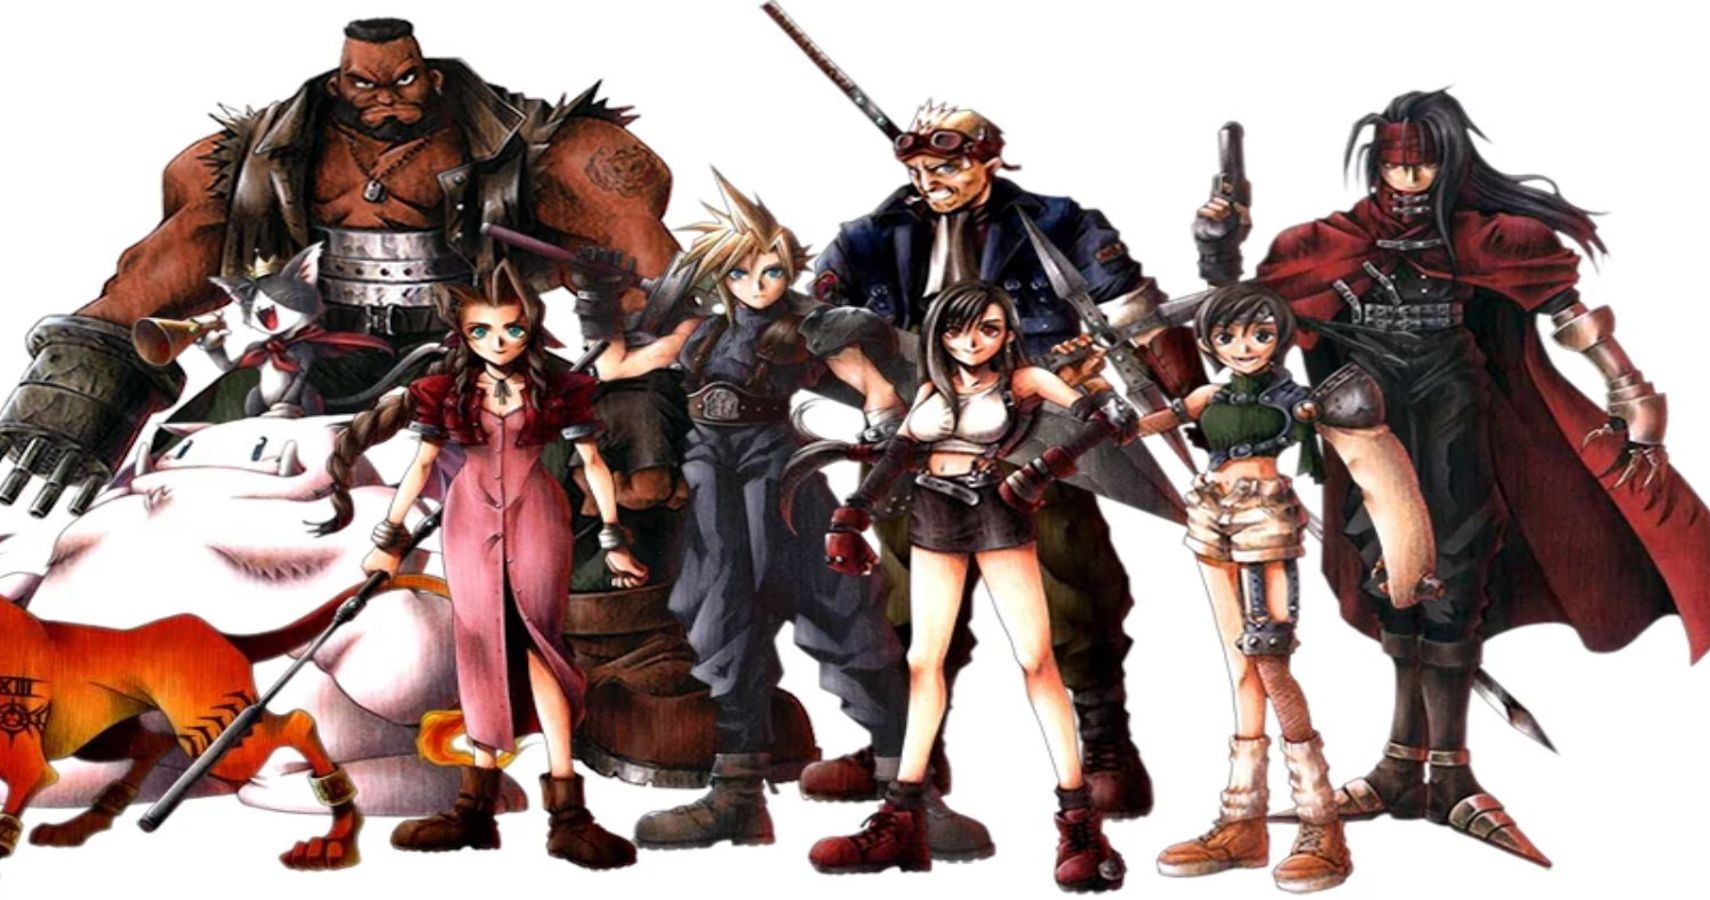 Complete List of Final Fantasy 7 Characters (Playable)